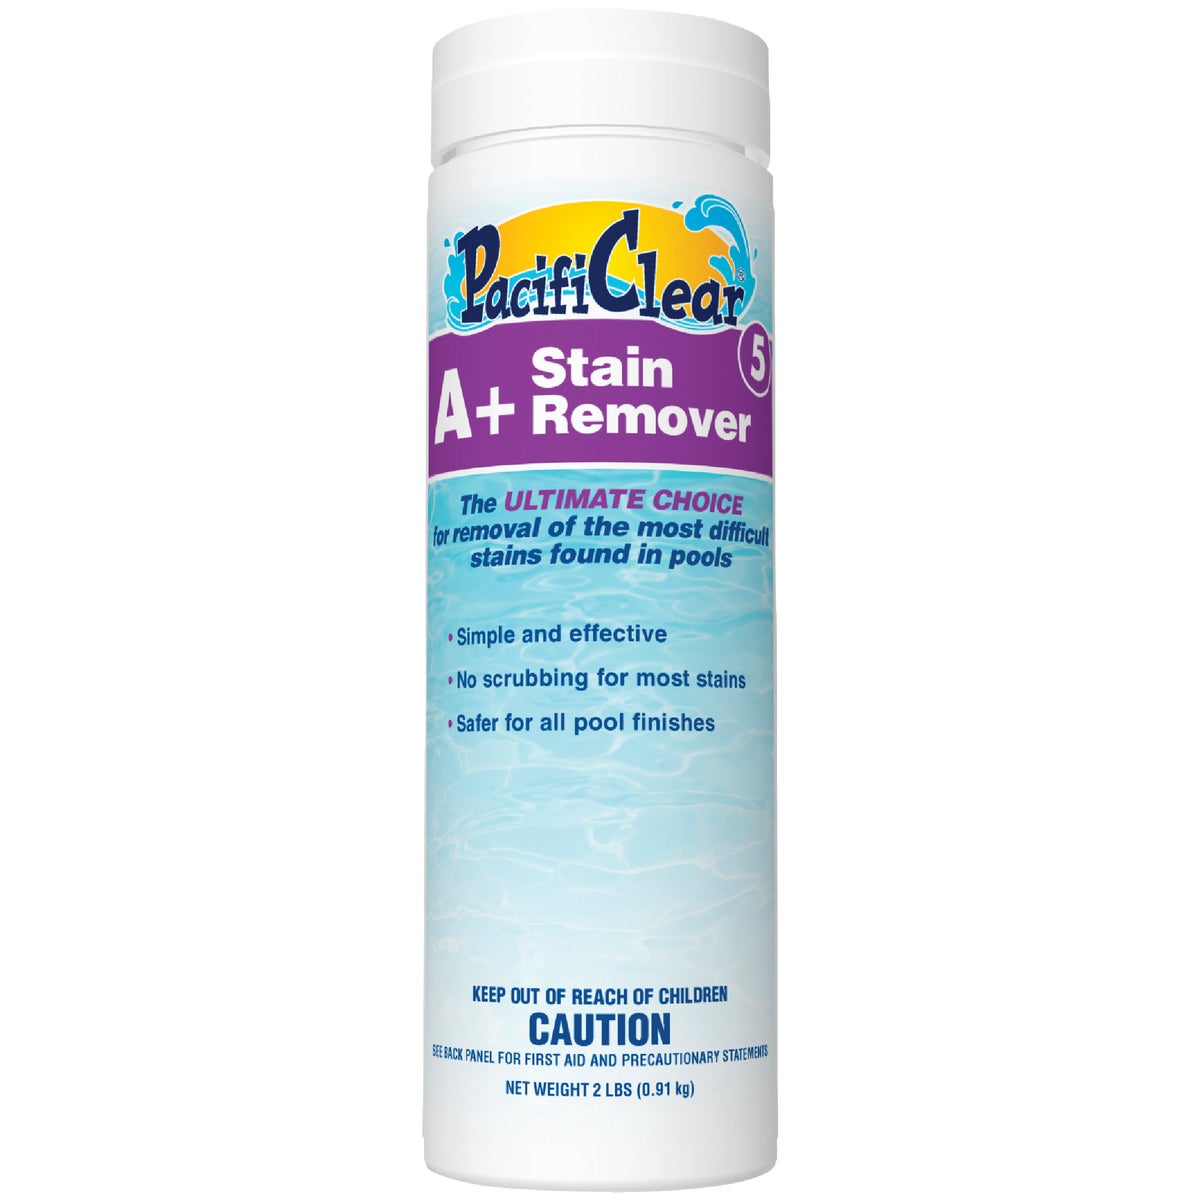 2LB A+ STAIN REMOVER